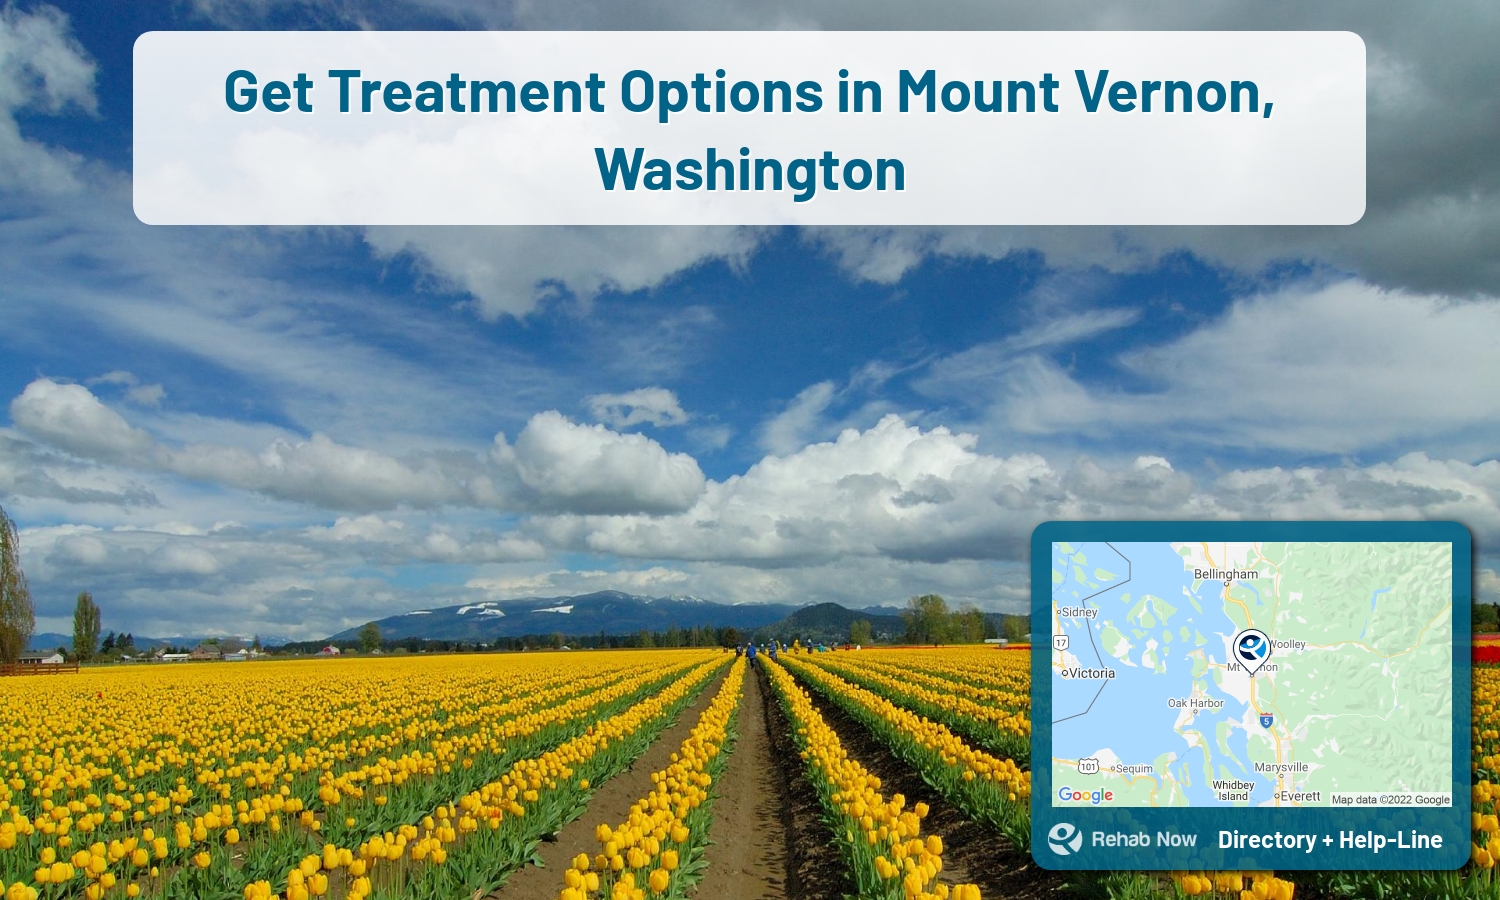 Our experts can help you find treatment now in Mount Vernon, Washington. We list drug rehab and alcohol centers in Washington.